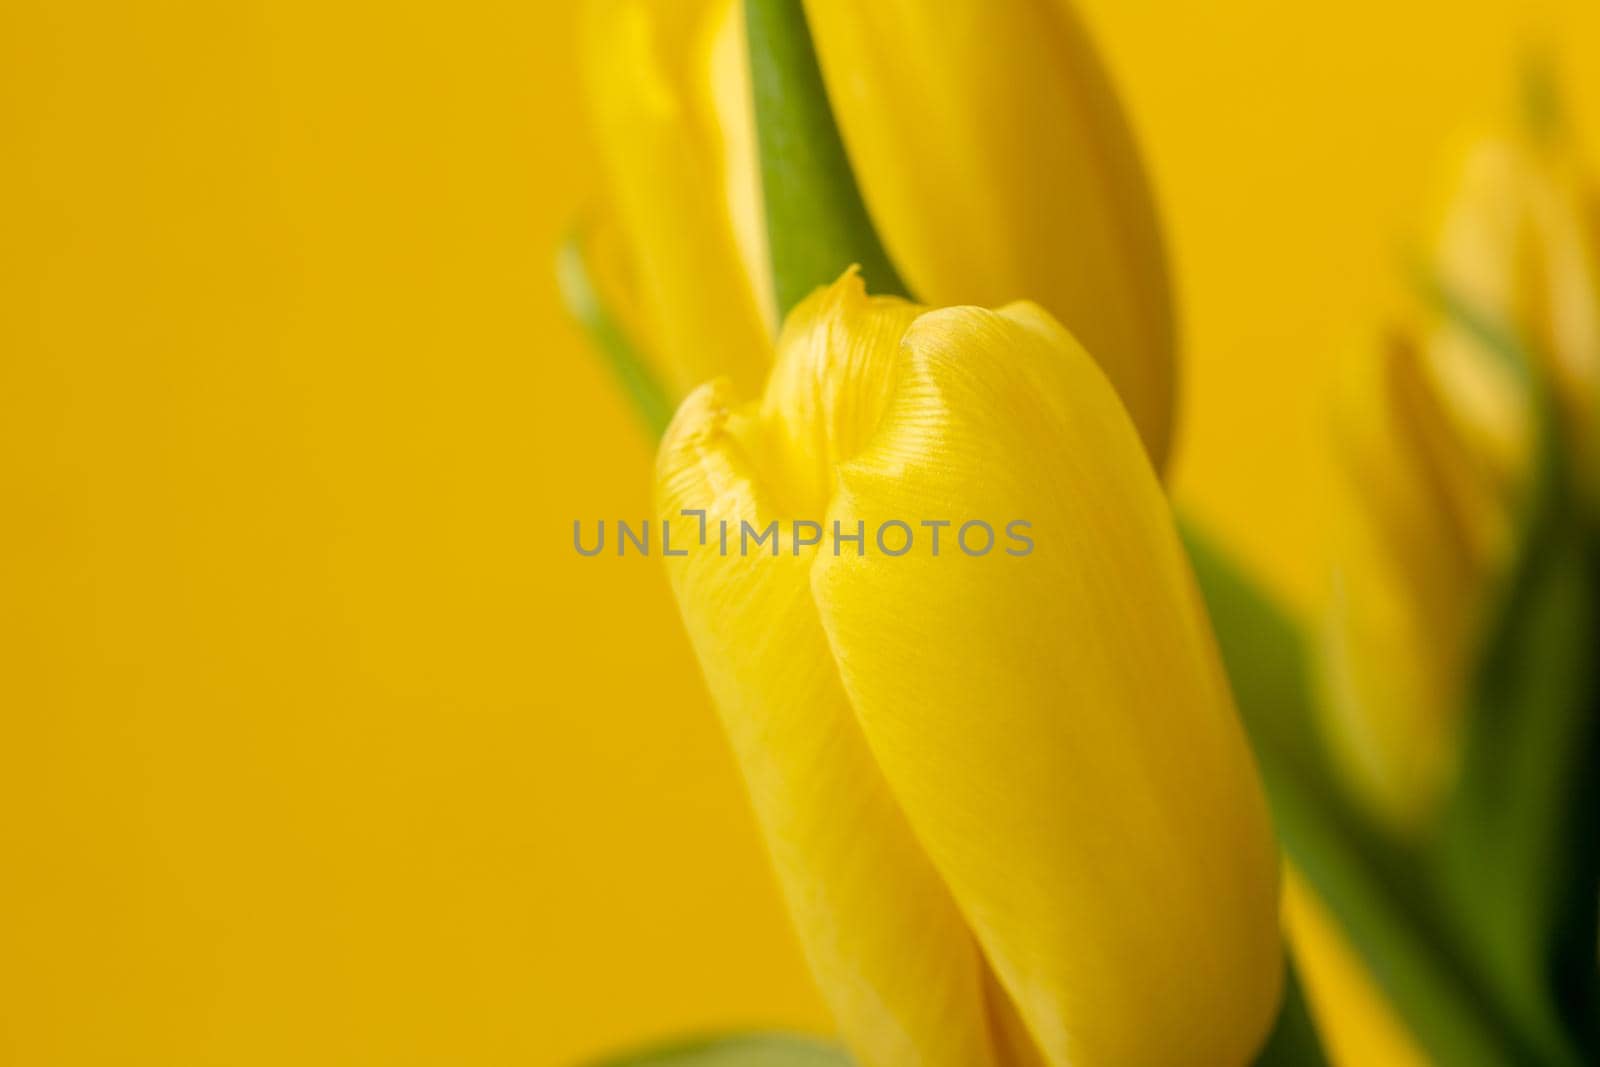 fresh yellow tulips with green leaves and stems on a yellow textured background.